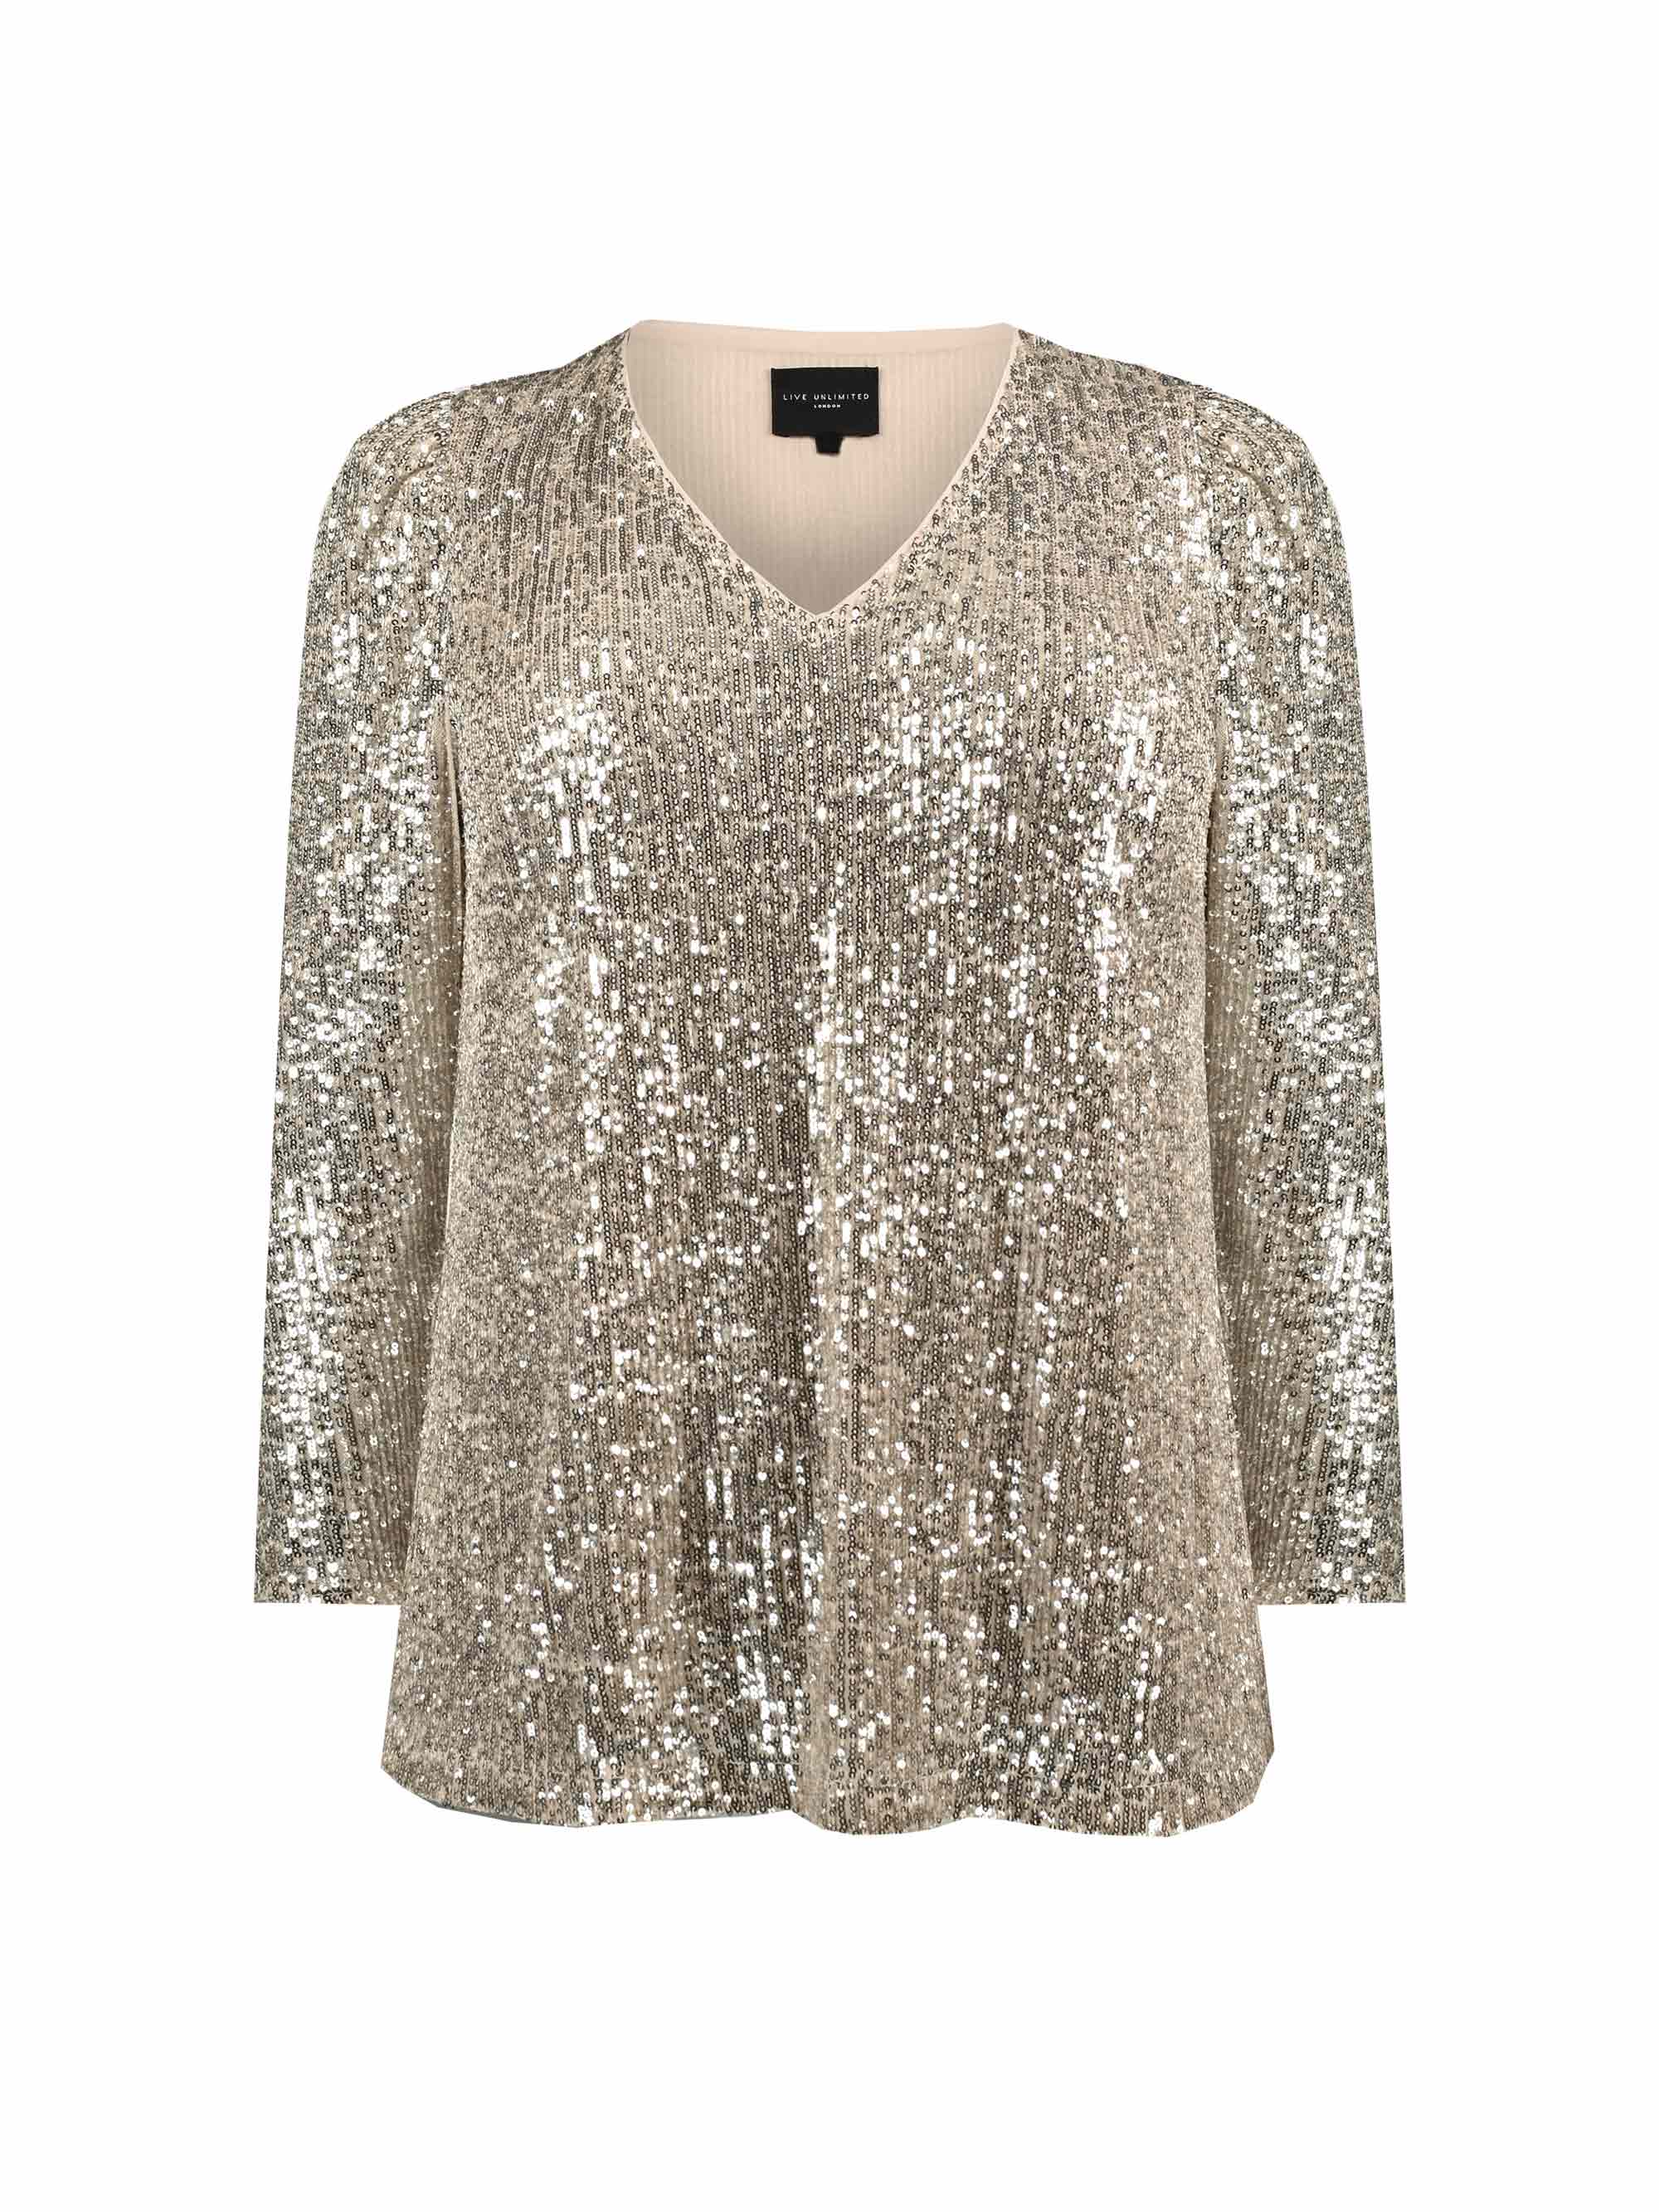 Champagne Puff Sleeve Sequin Top